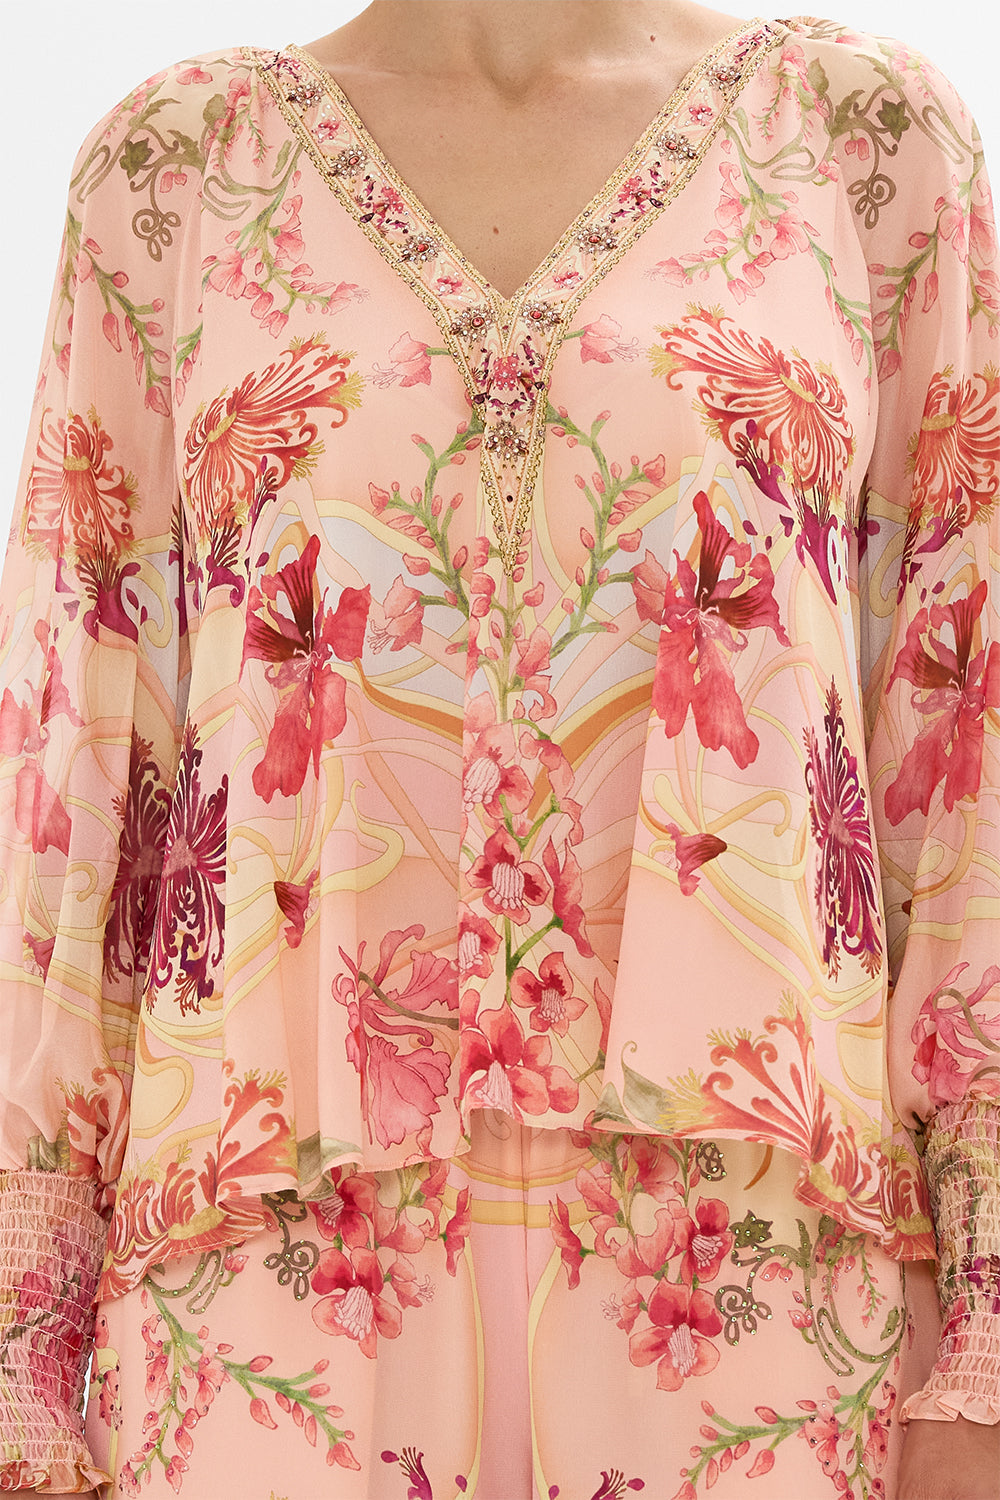 CAMILLA Floral Shirred Cuff Blouse in Blossoms and Brushstrokes print